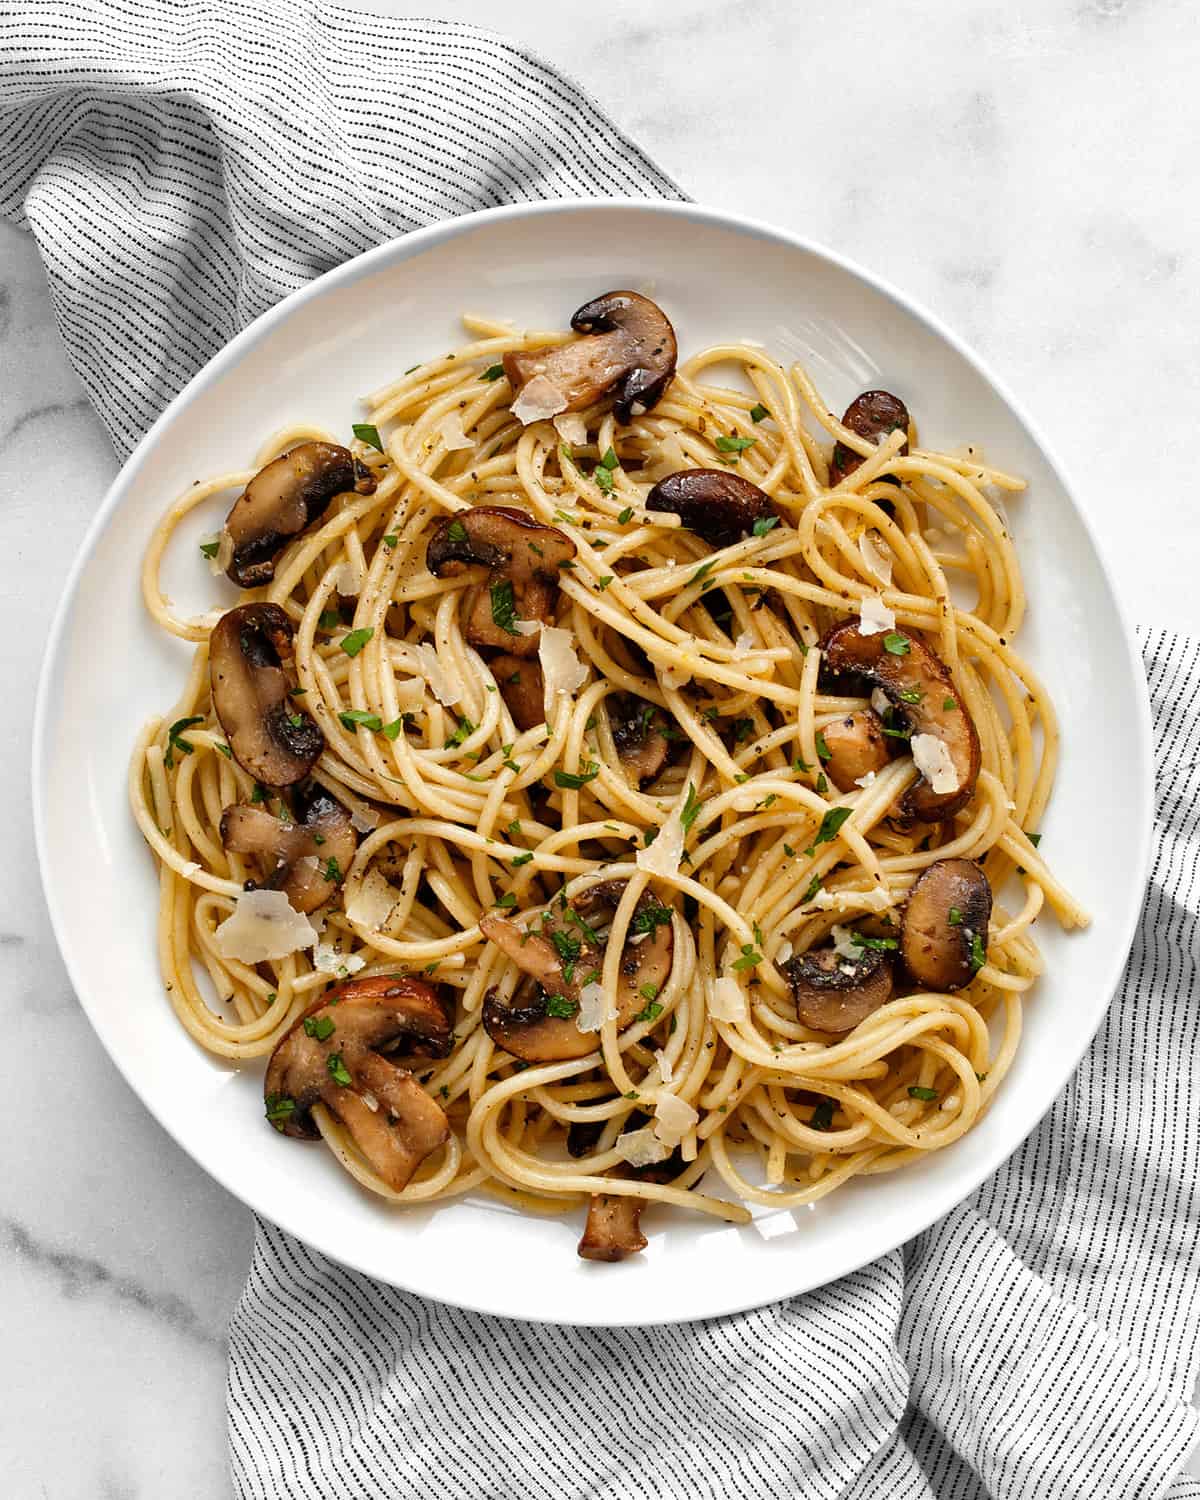 Spaghetti with lemon and mushrooms on a plate.